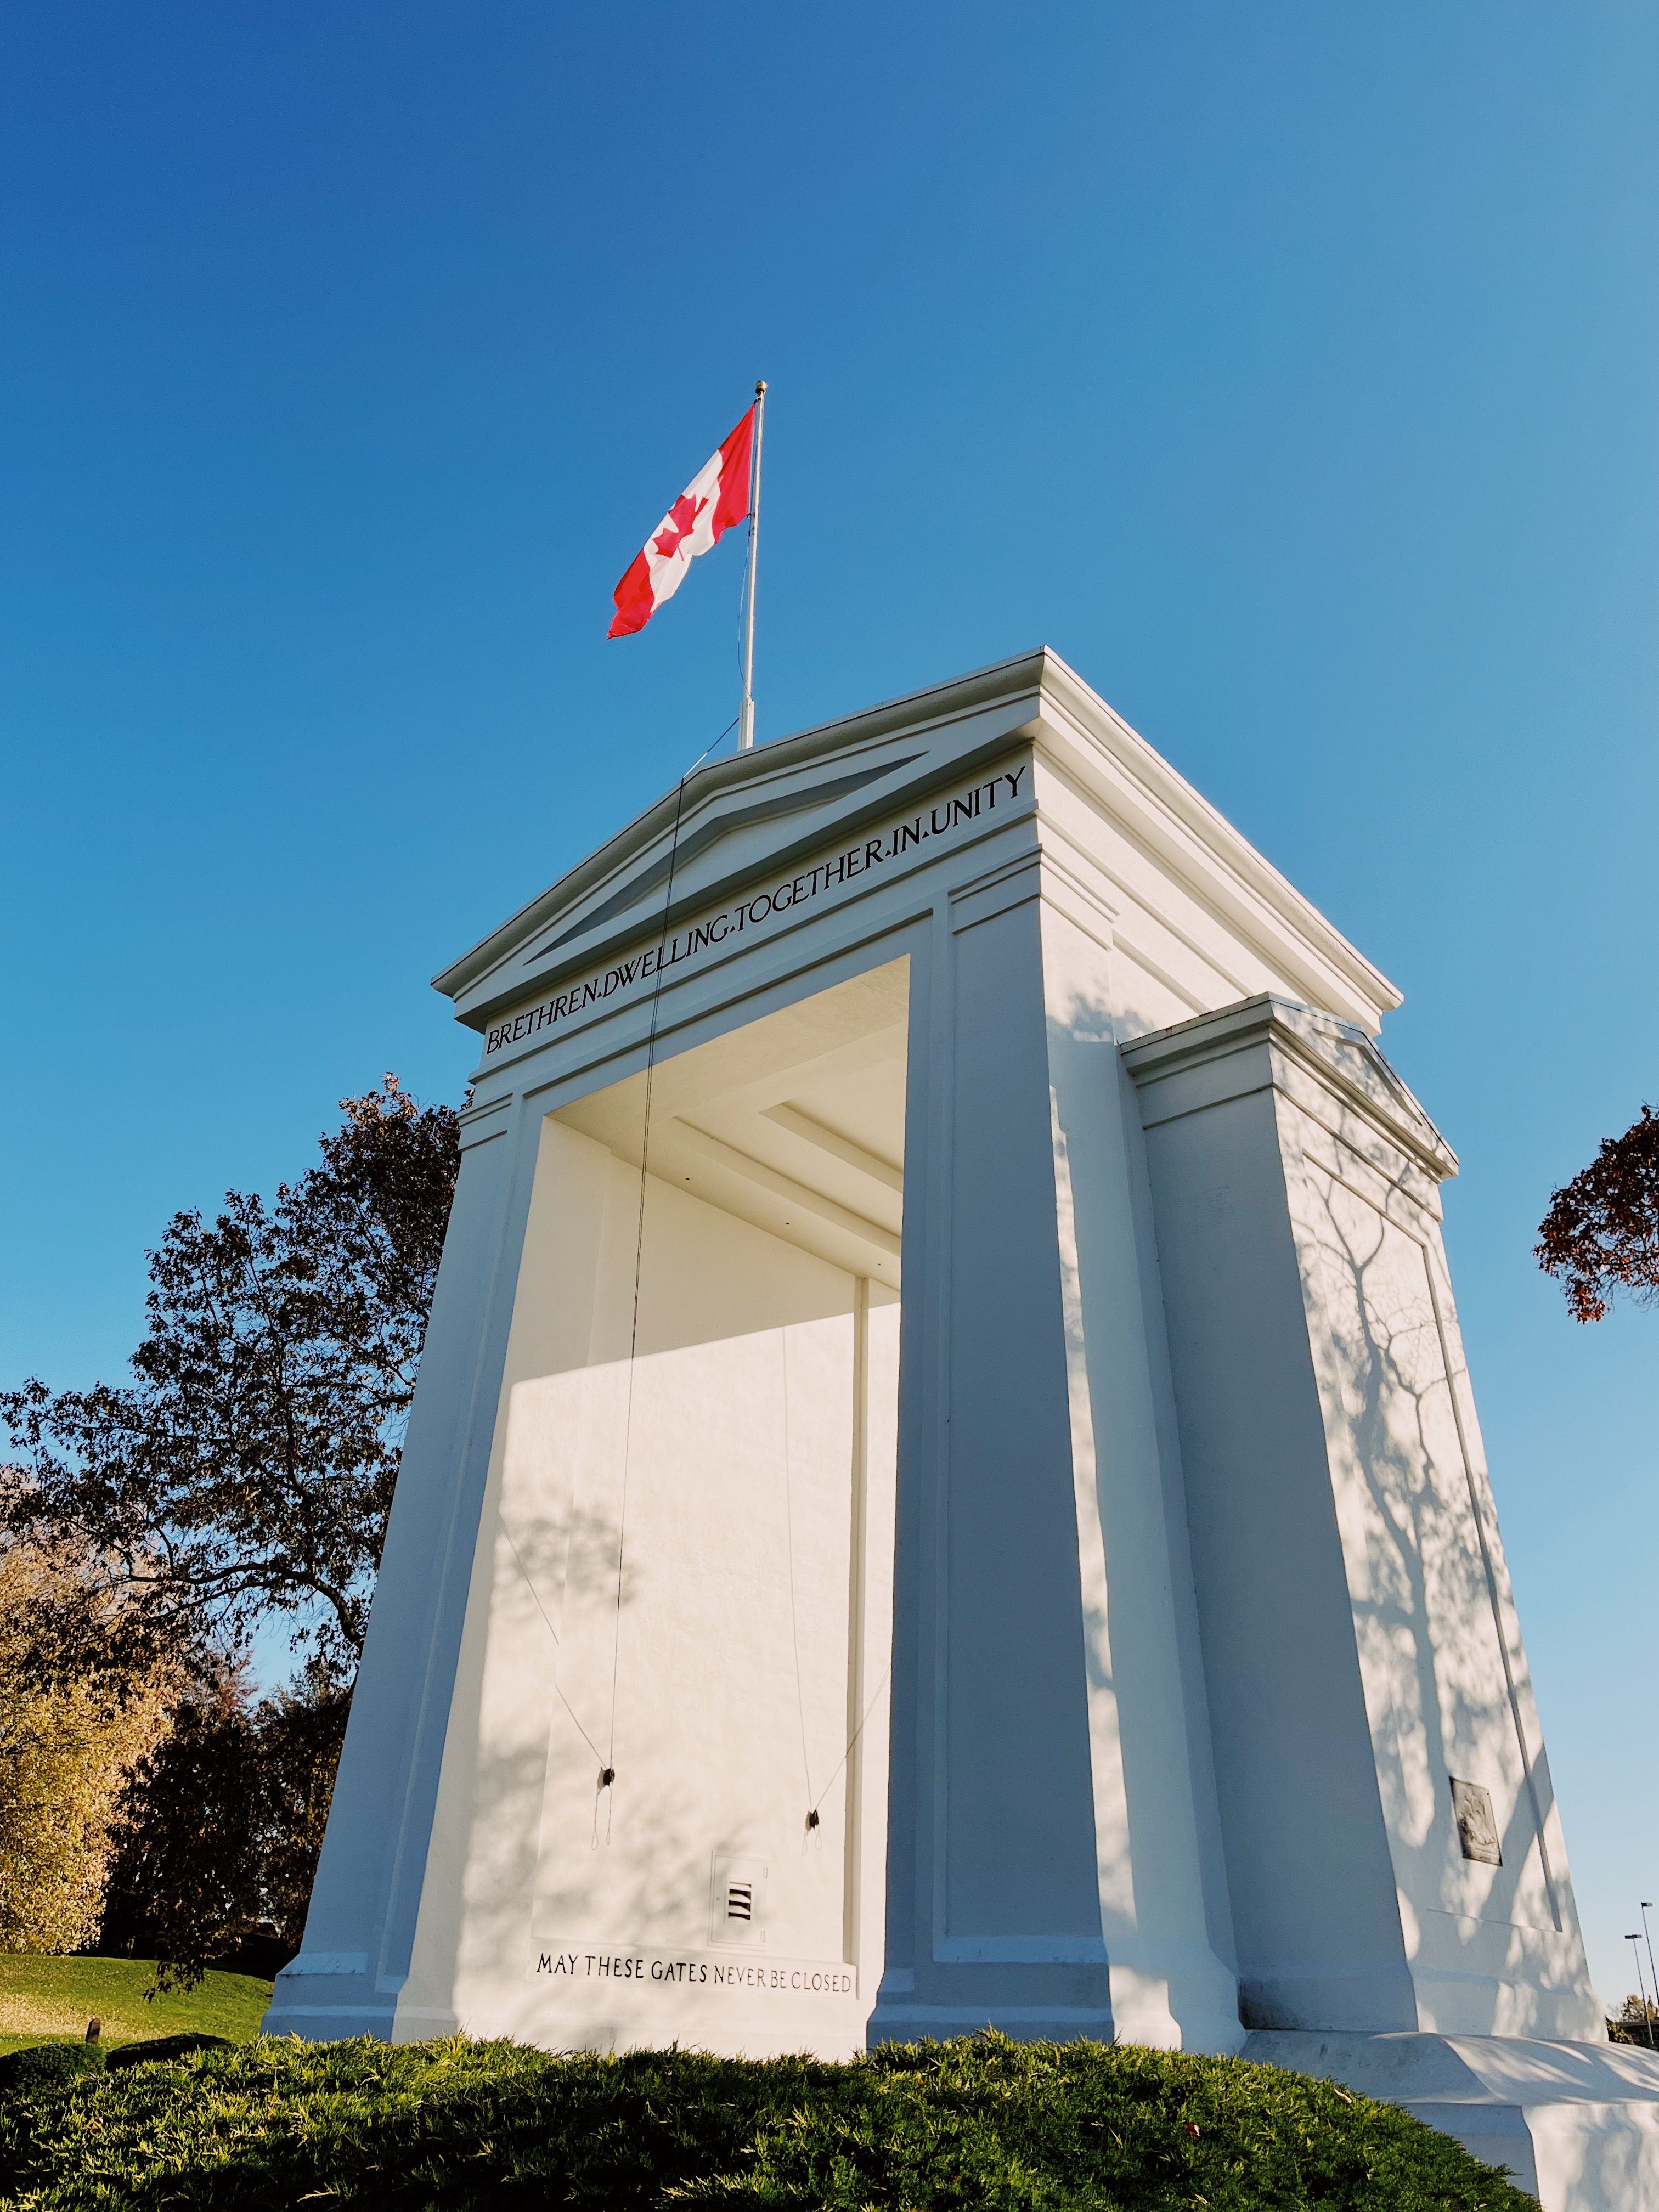 The Peace Arch at the US-Canada border, with the Canadian flag mounted above.